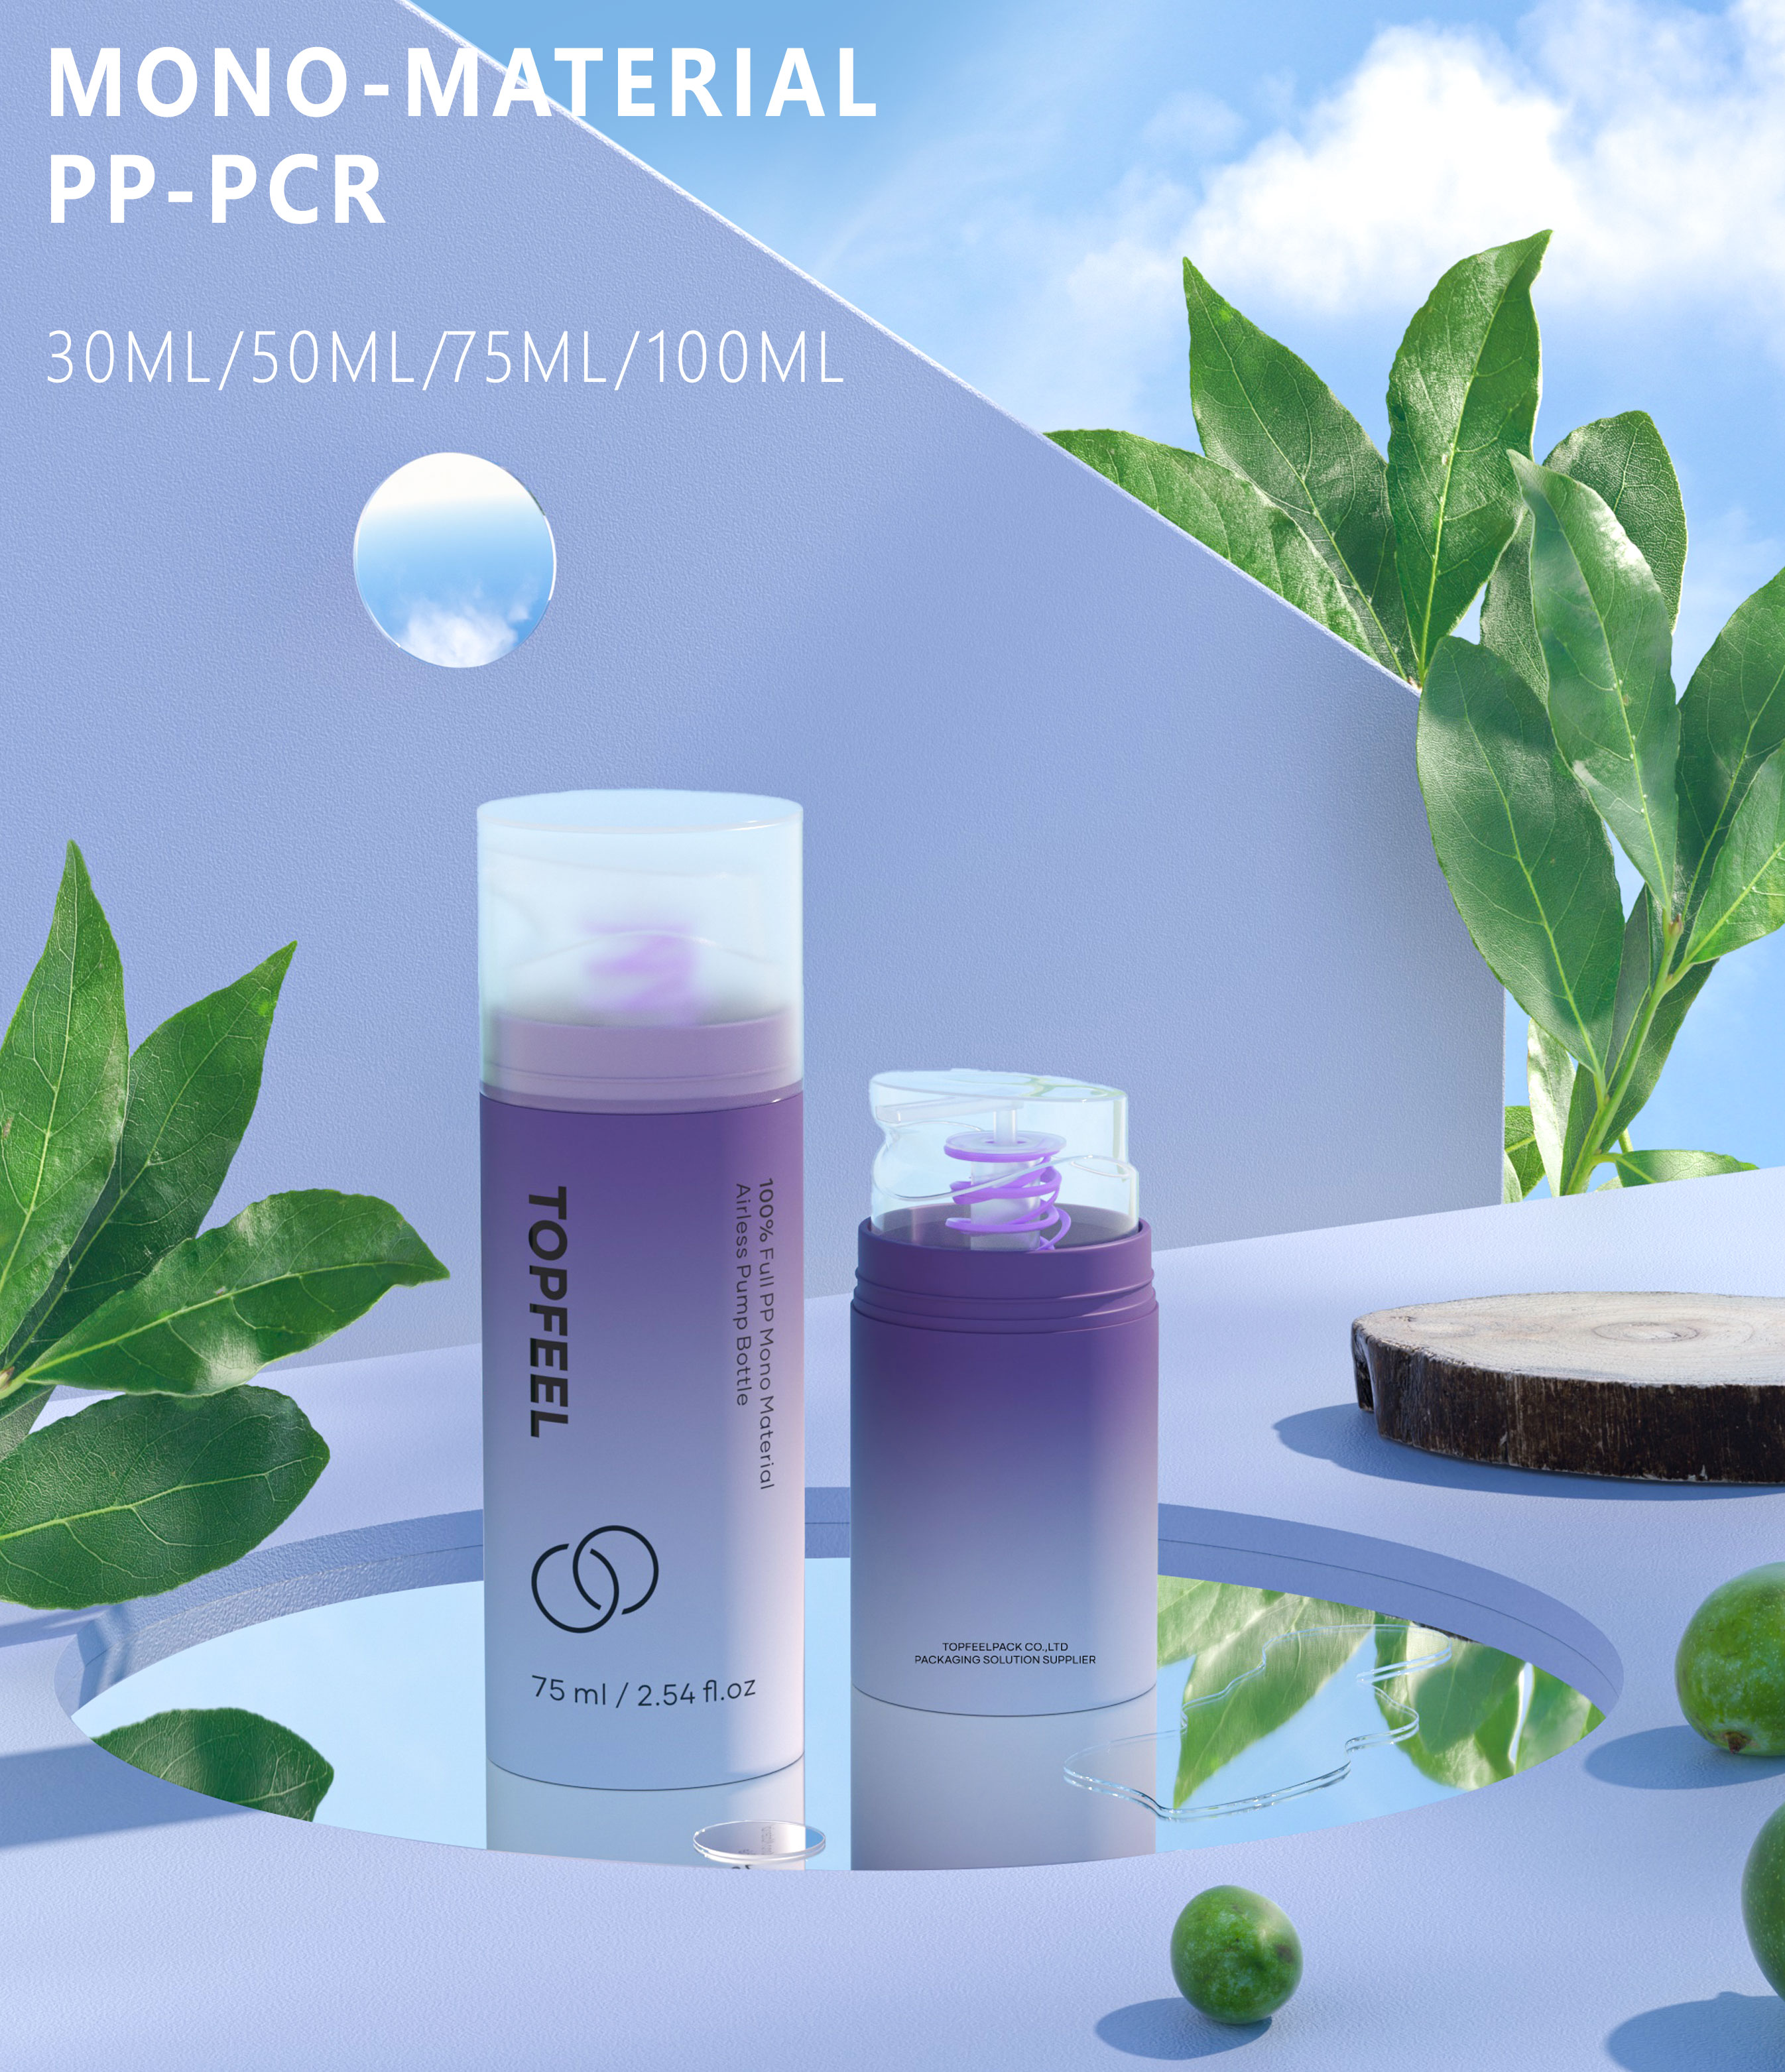 https://www.topfeelpack.com/25-recyclable-plastic-eco-friendly-pcr-material-airless-pump-bottle-product/